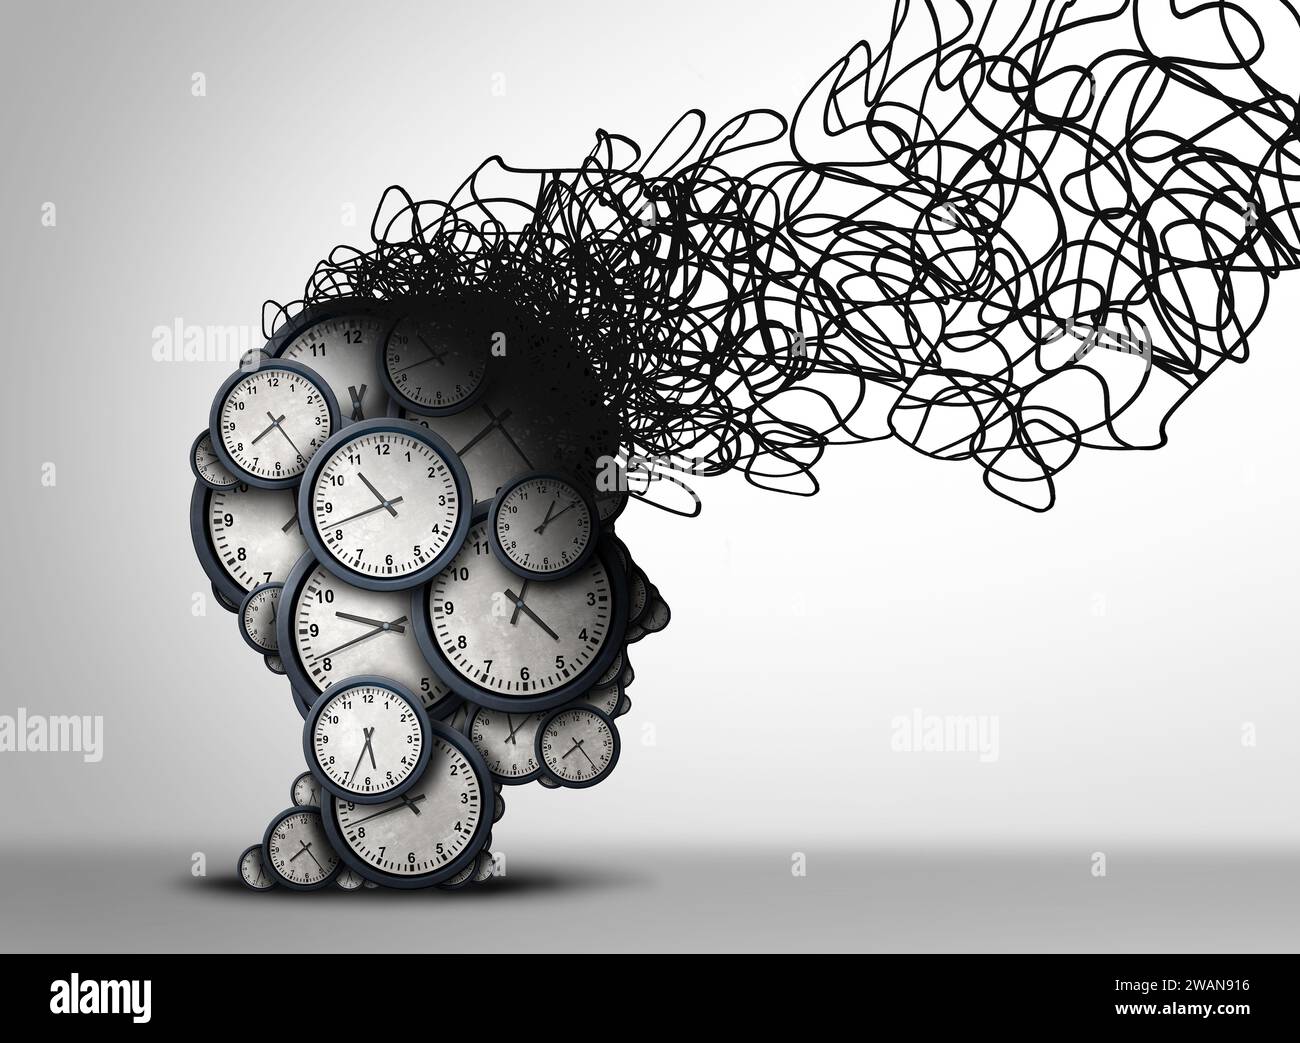 Time stress concept and Anxiety and deadline psychology pressures or work scedule stress representing hours and minutes as a business concept Stock Photo